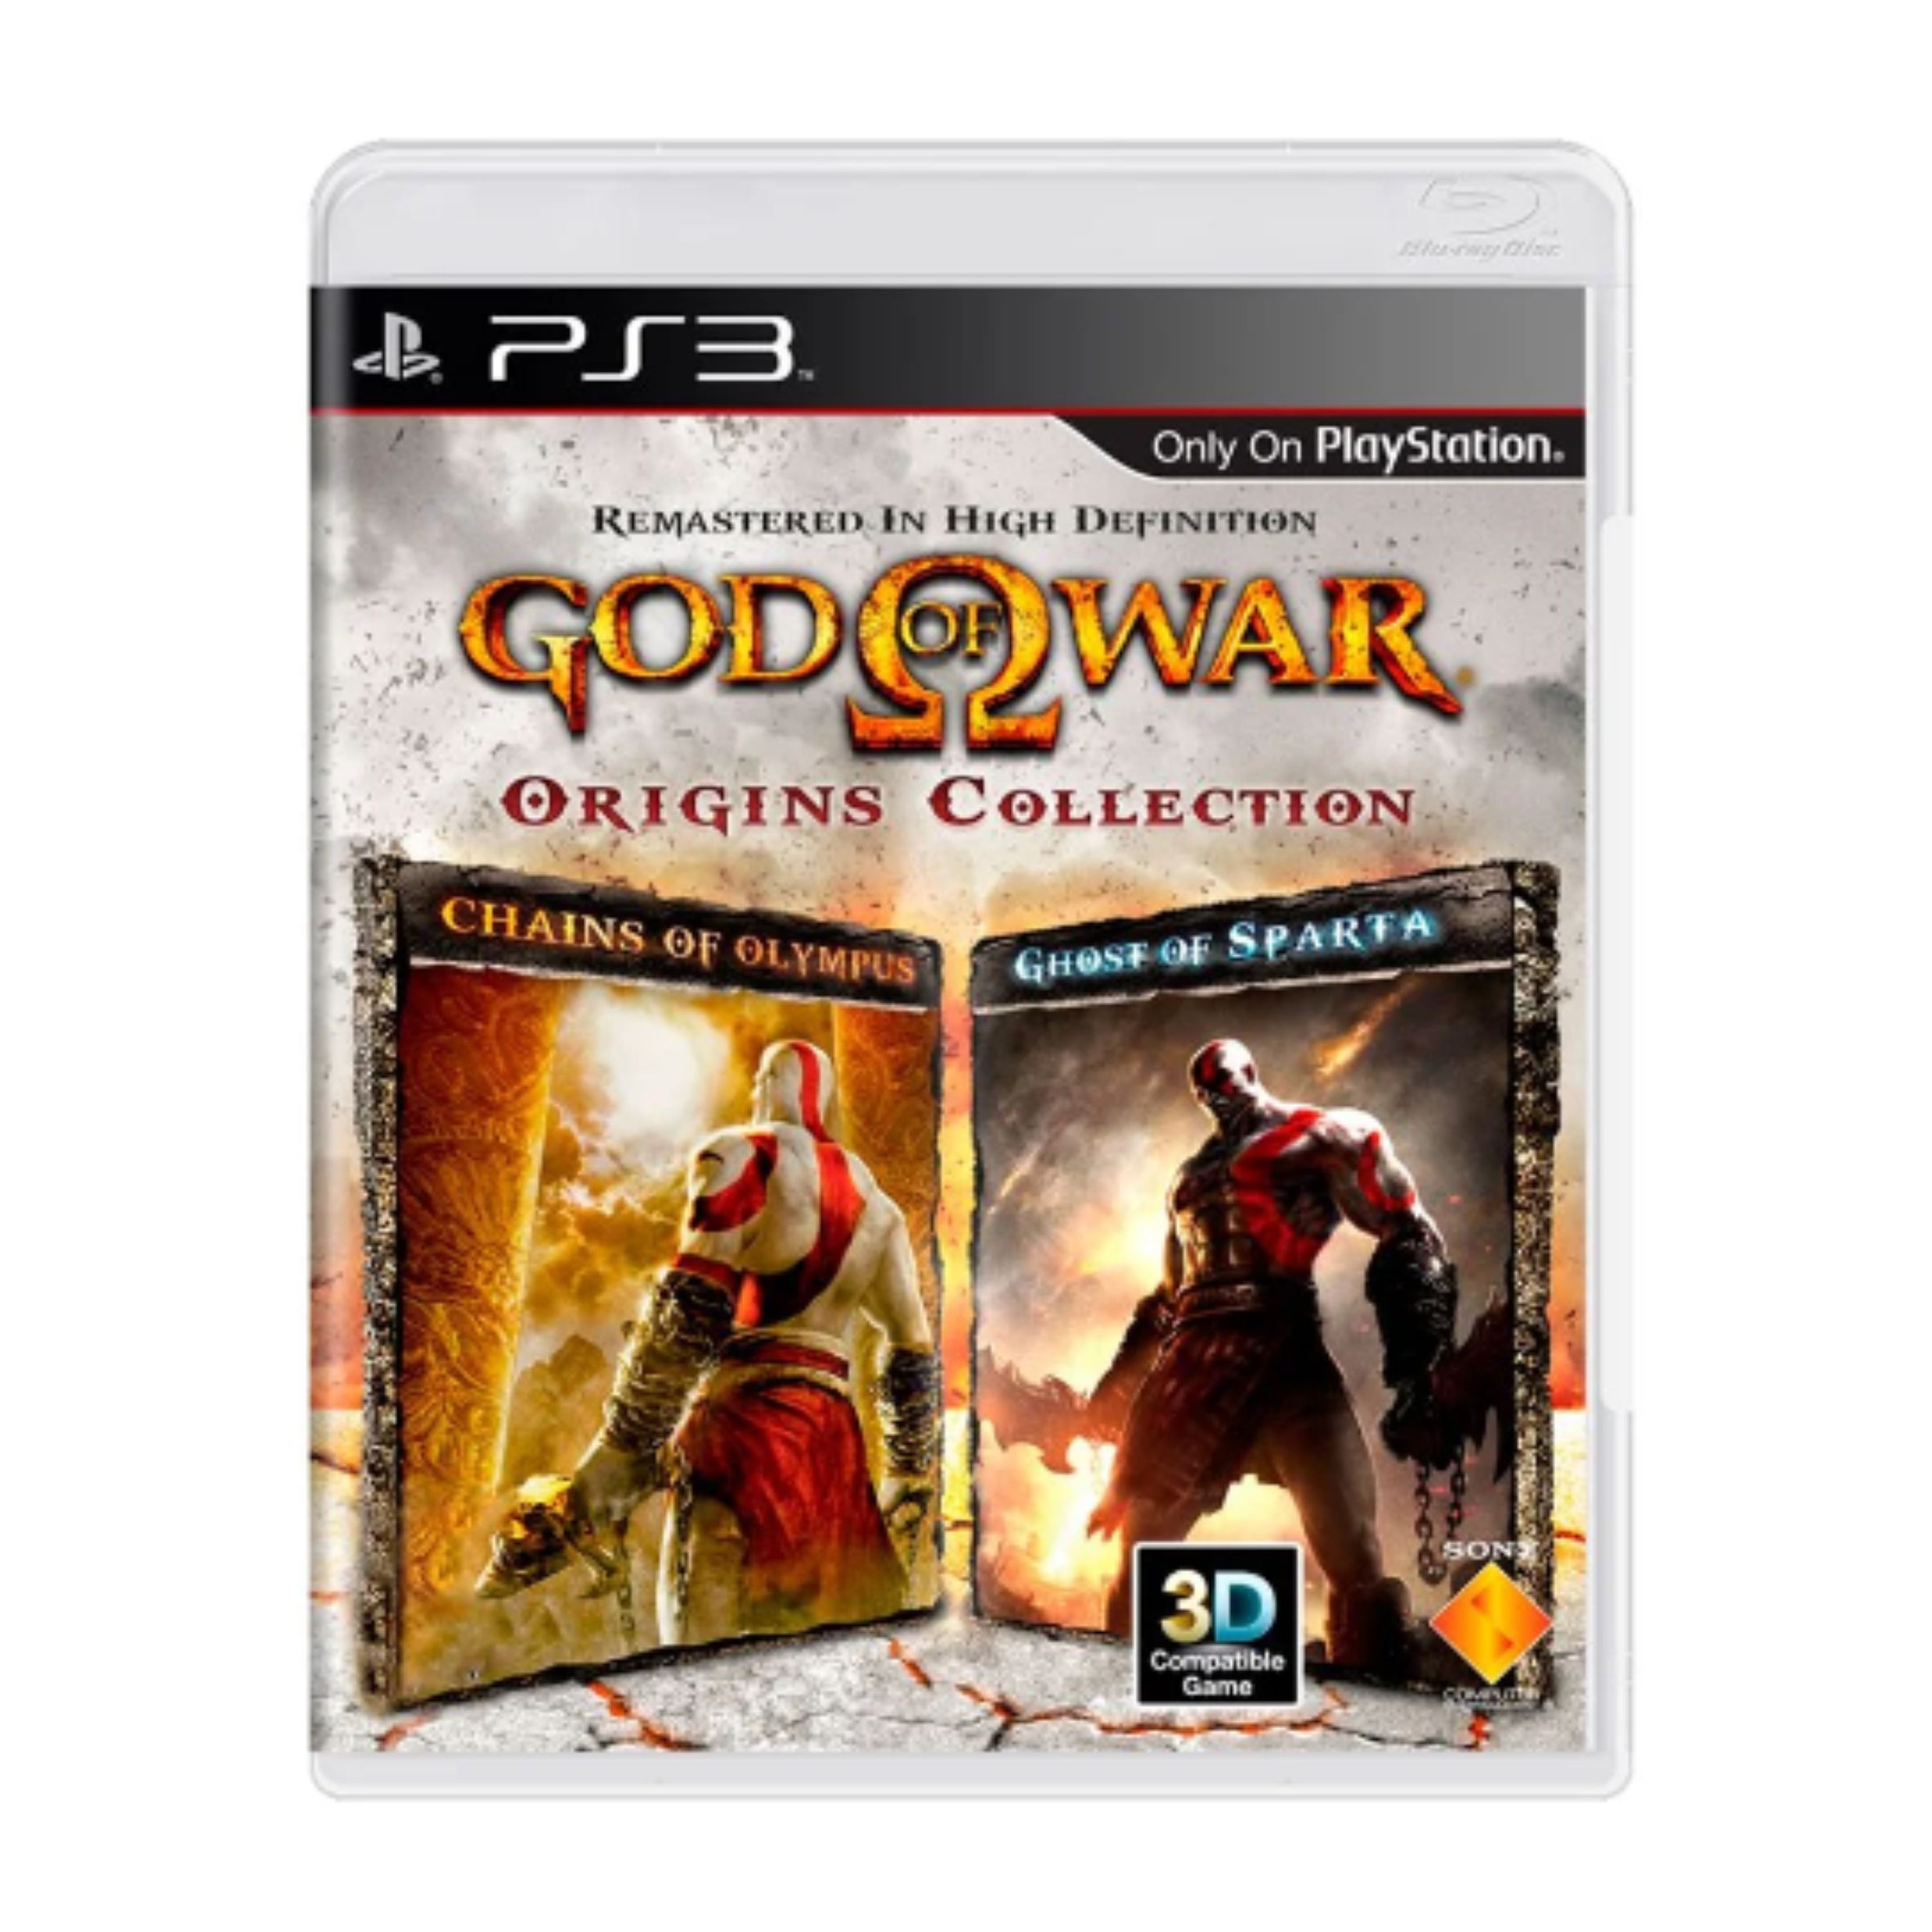 The God of War Collection